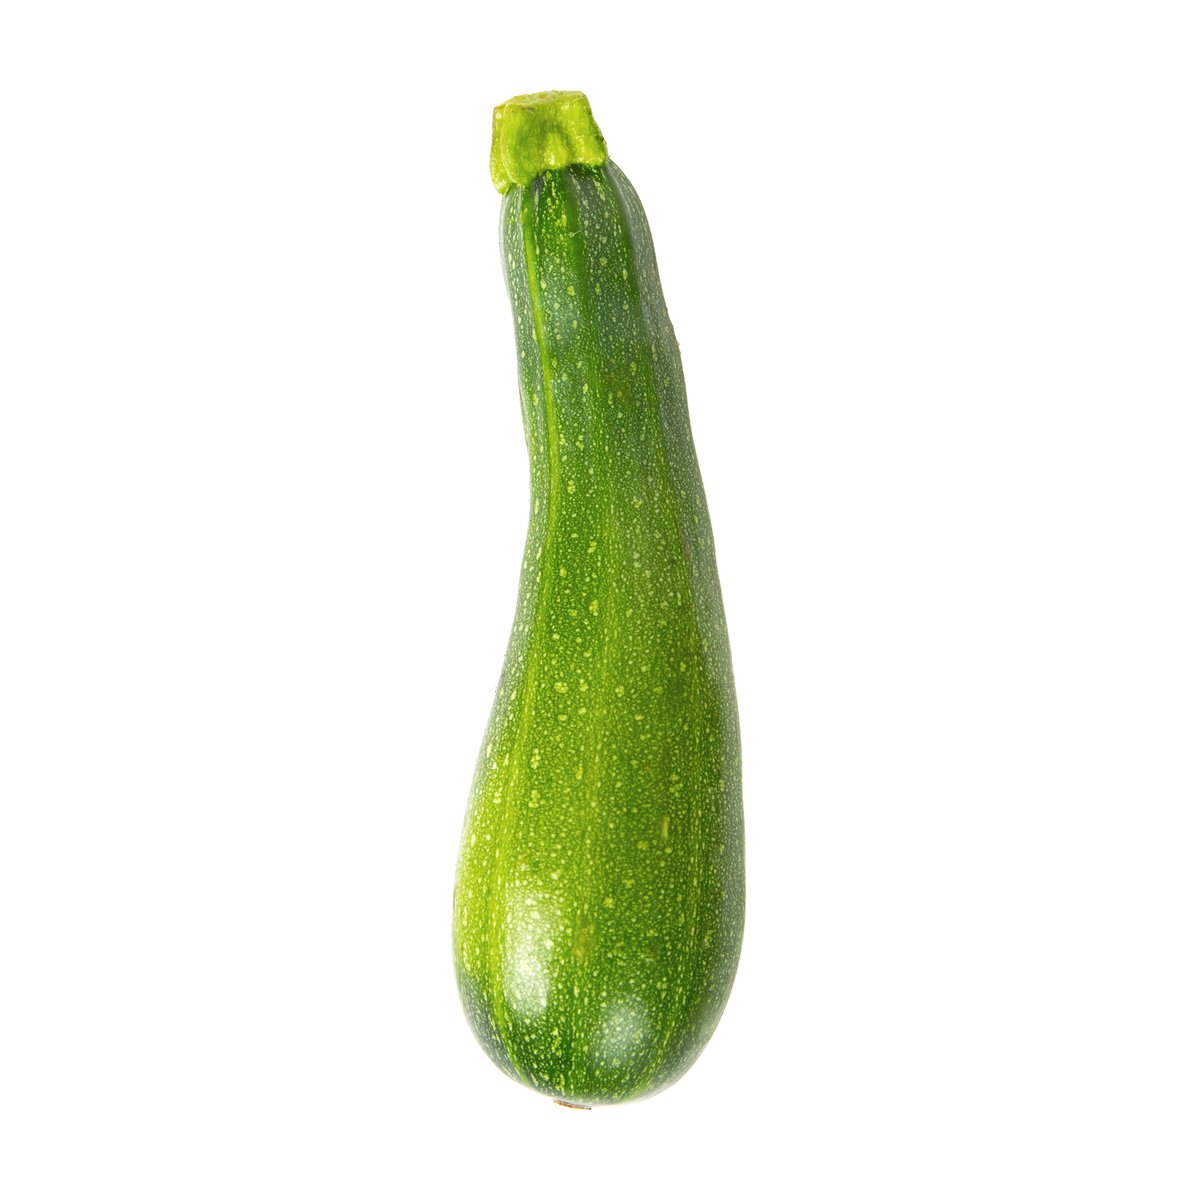 Courgette Green Local 500 g